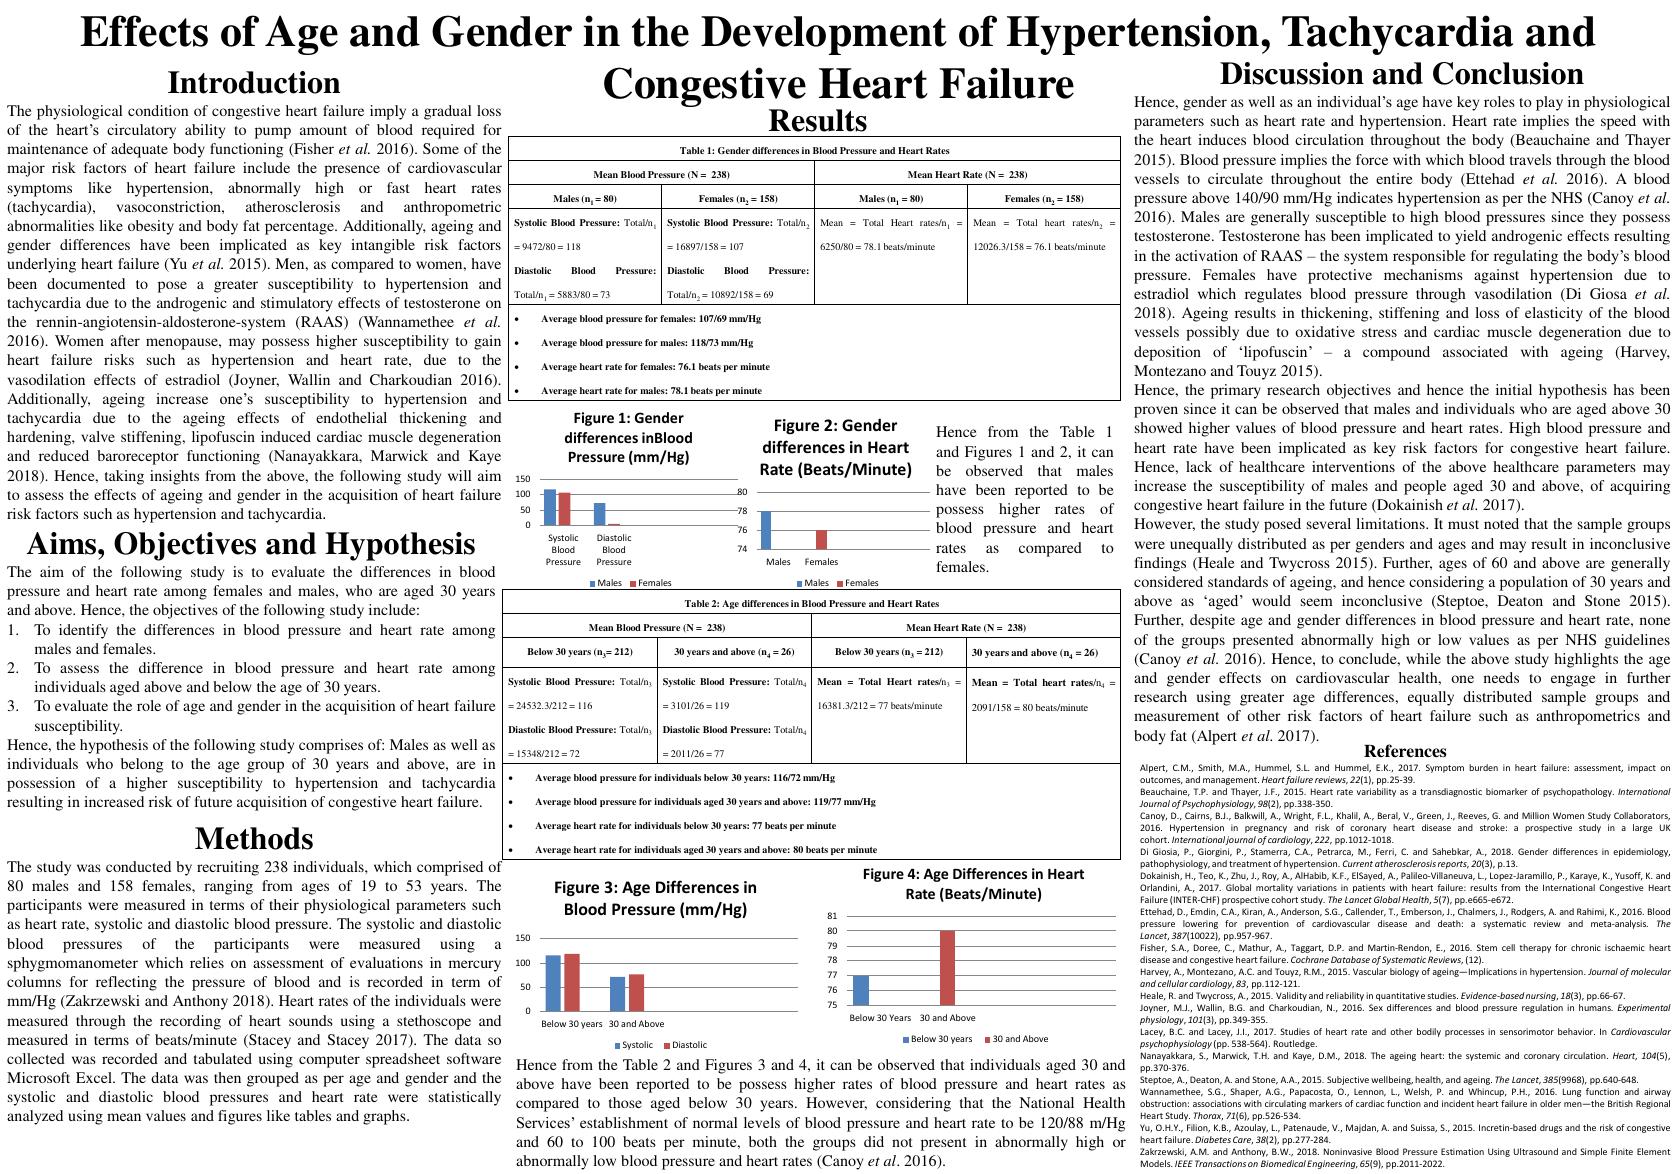 Effects of Age and Gender in the Development of Hypertension, Tachycardia and Congestive Heart Failure_1